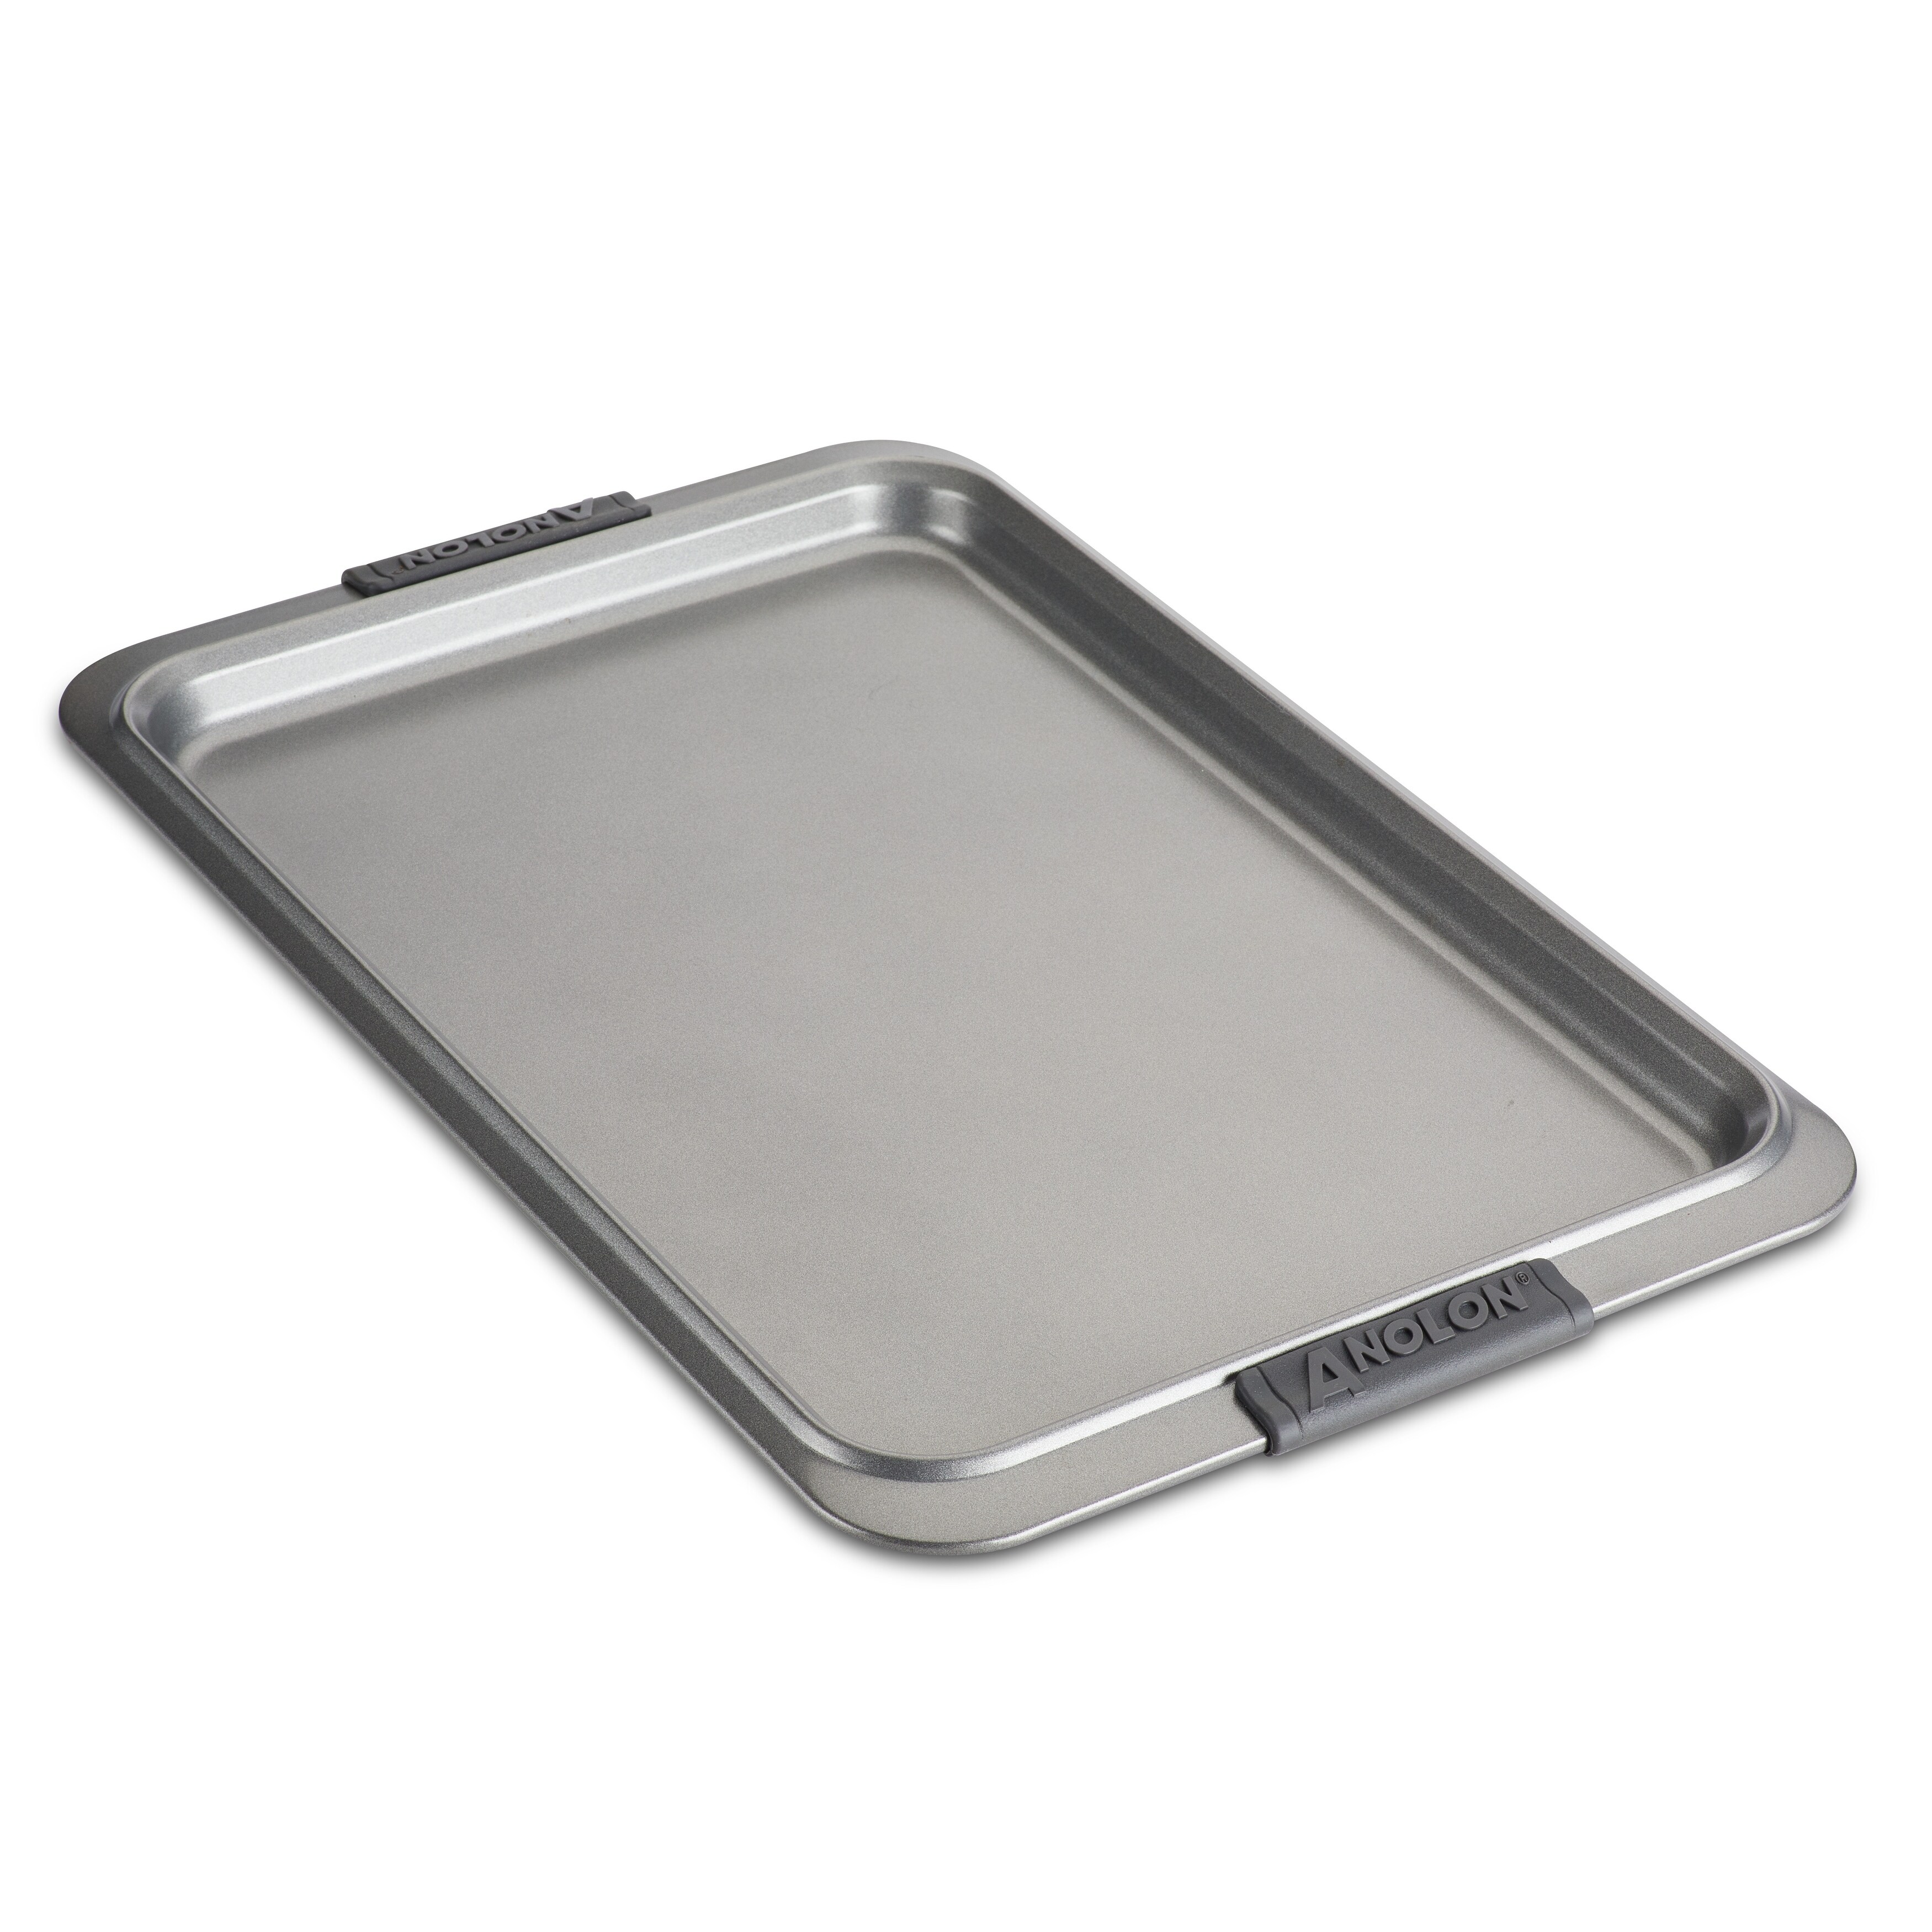 https://ak1.ostkcdn.com/images/products/is/images/direct/8a71cfc79d6080d0ef44a214b35489378cb942b4/Anolon-Advanced-Bakeware-Nonstick-Cookie-Sheet%2C-11-Inch-x-17-Inch%2C-Gray-with-Silicone-Grips.jpg